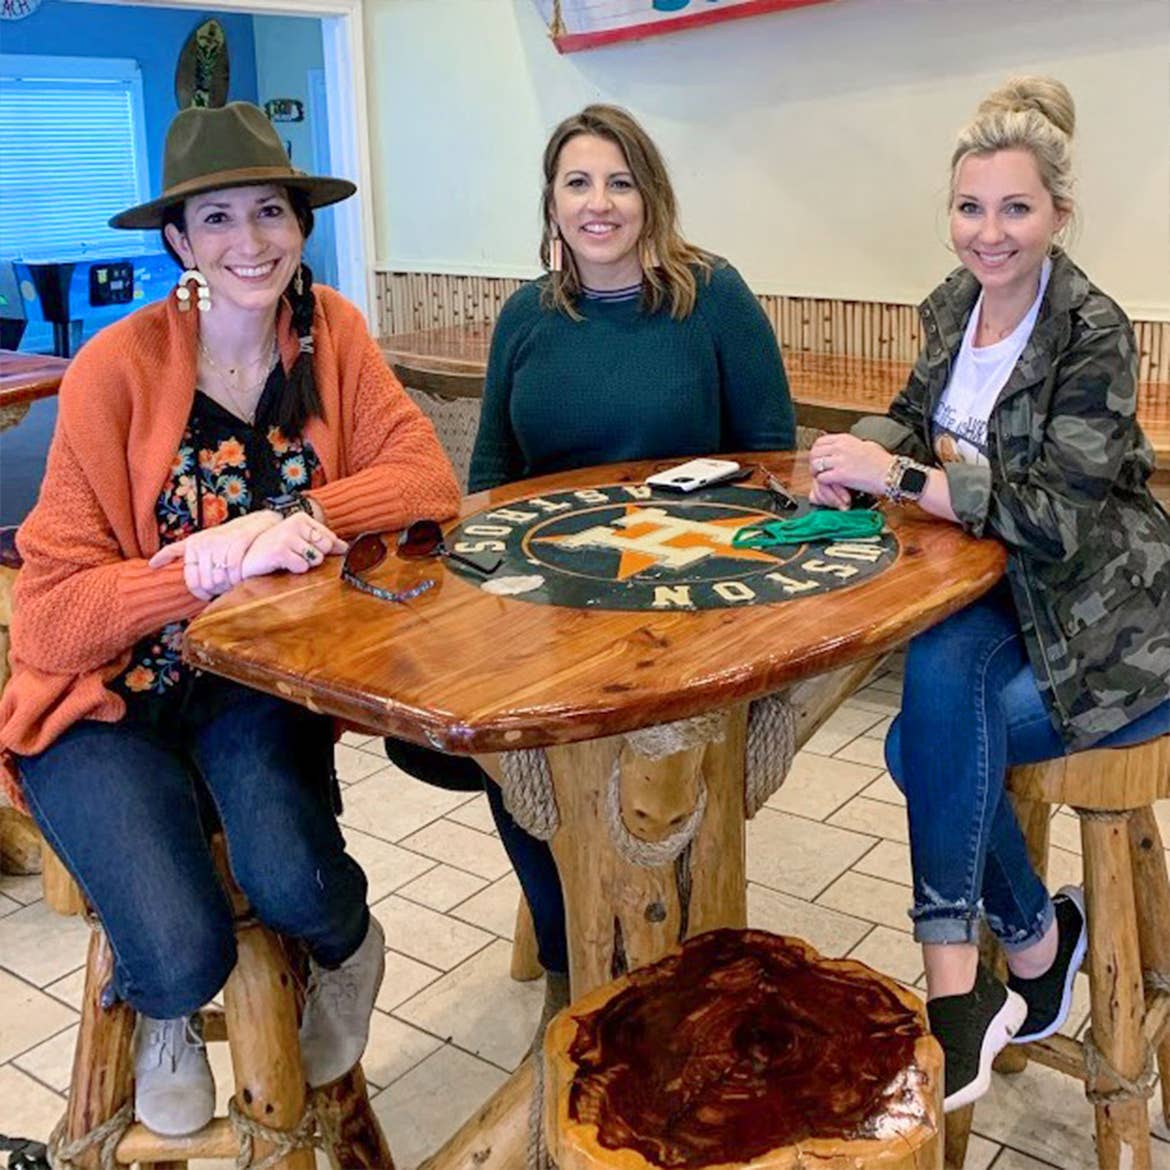 Featured Contributor, Amanda Nall (right) poses with her two friends at a table in Galveston, Tx.